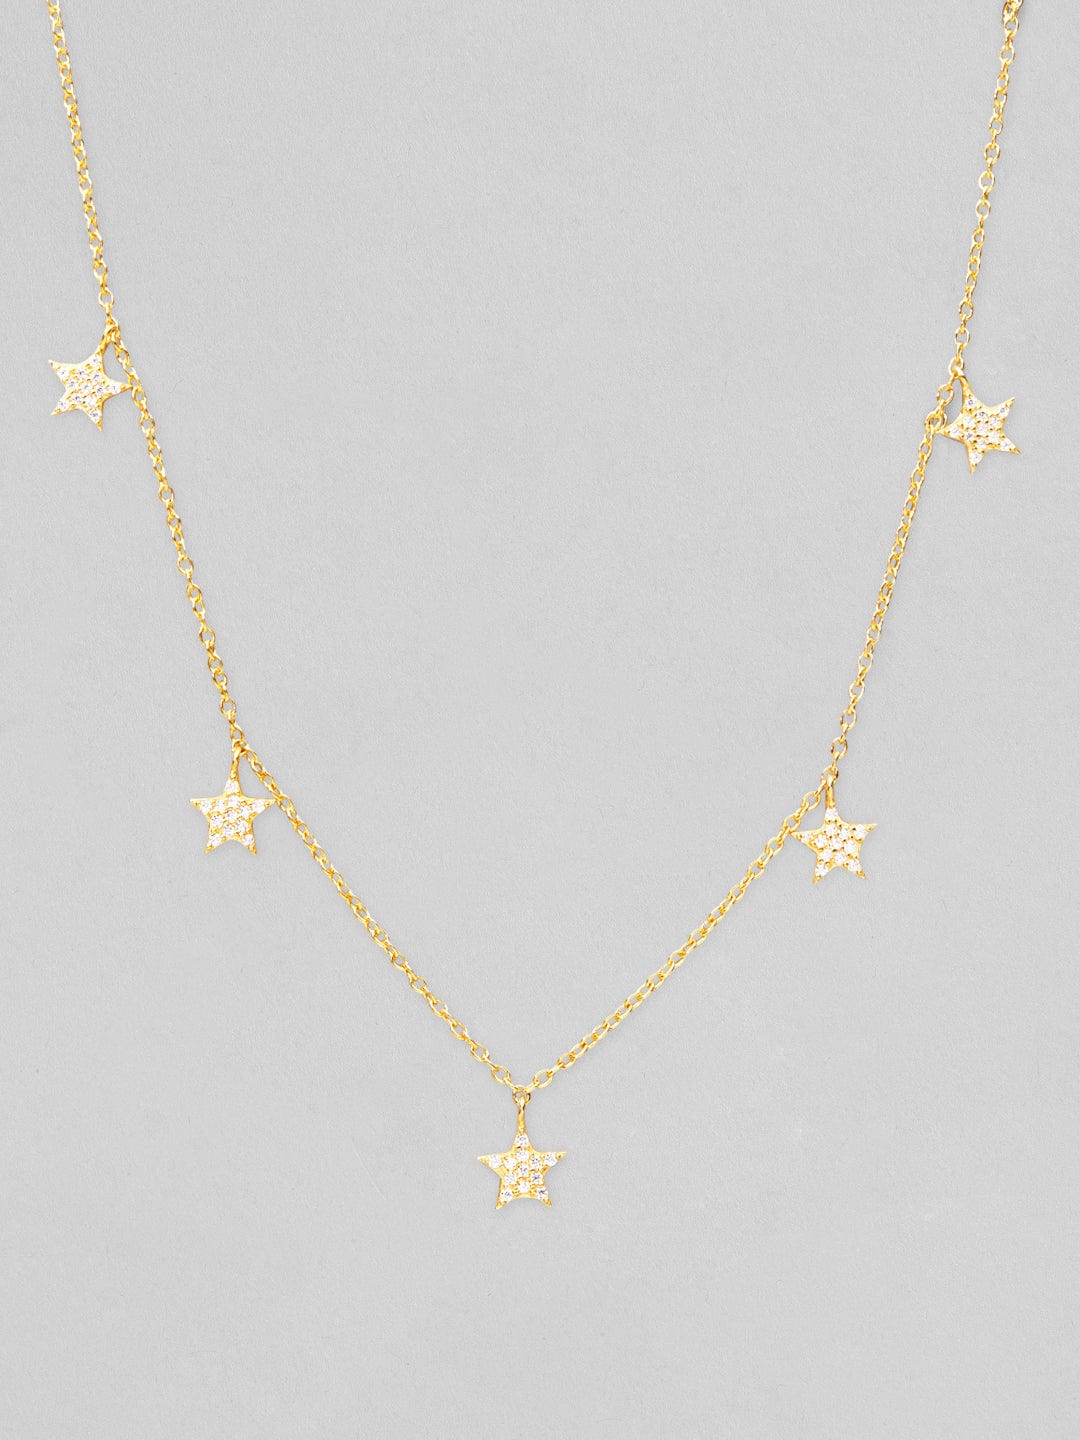 Rubans 925 Silver Shine As A Star Chain Style Necklace.- Gold Plated Chain & Necklaces